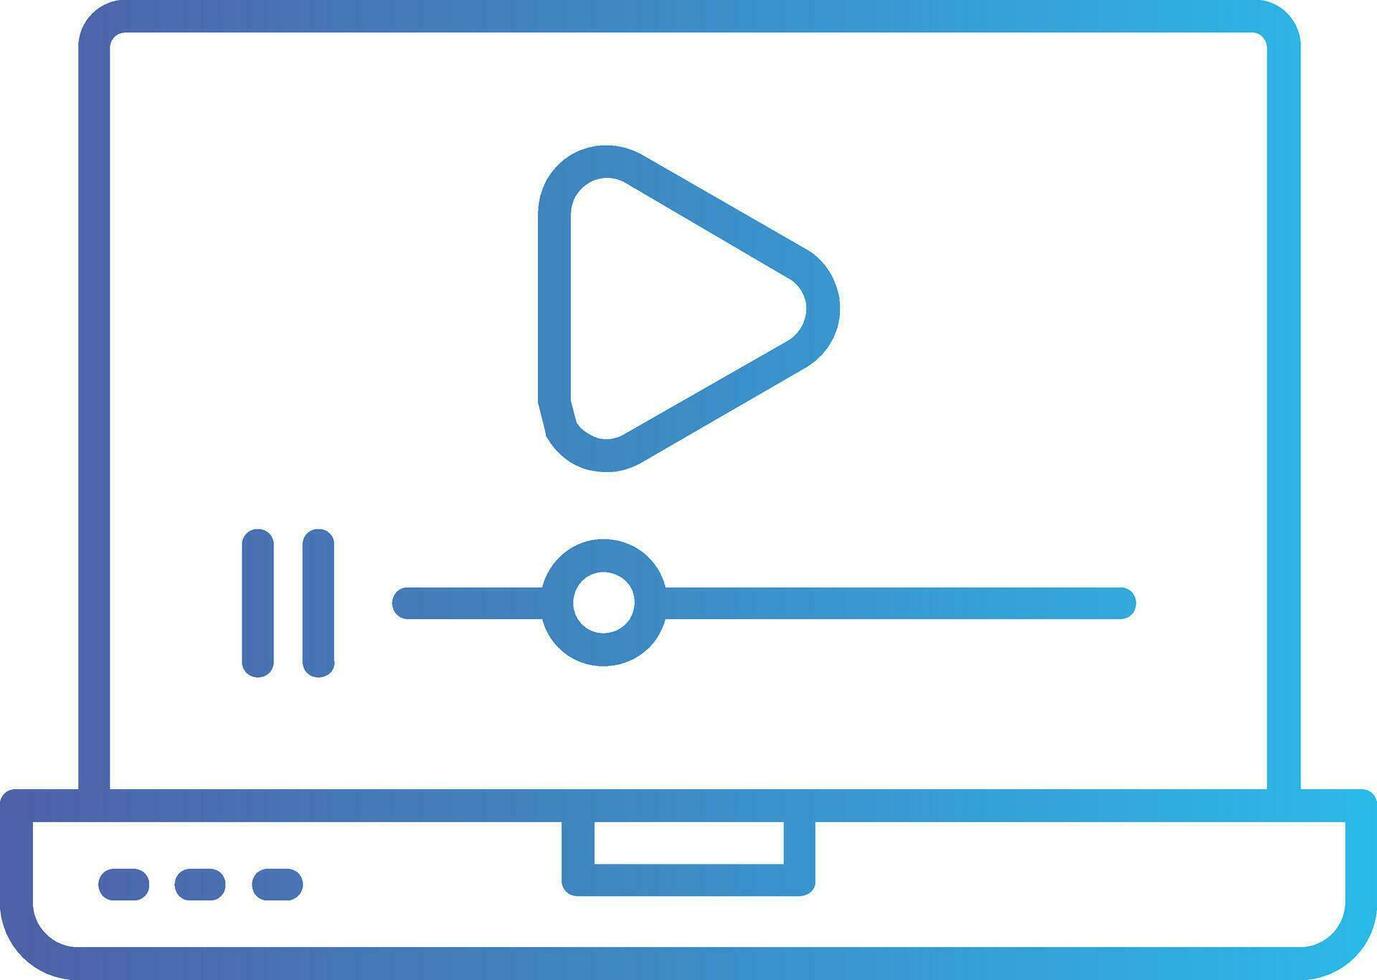 Video Player Vector Icon